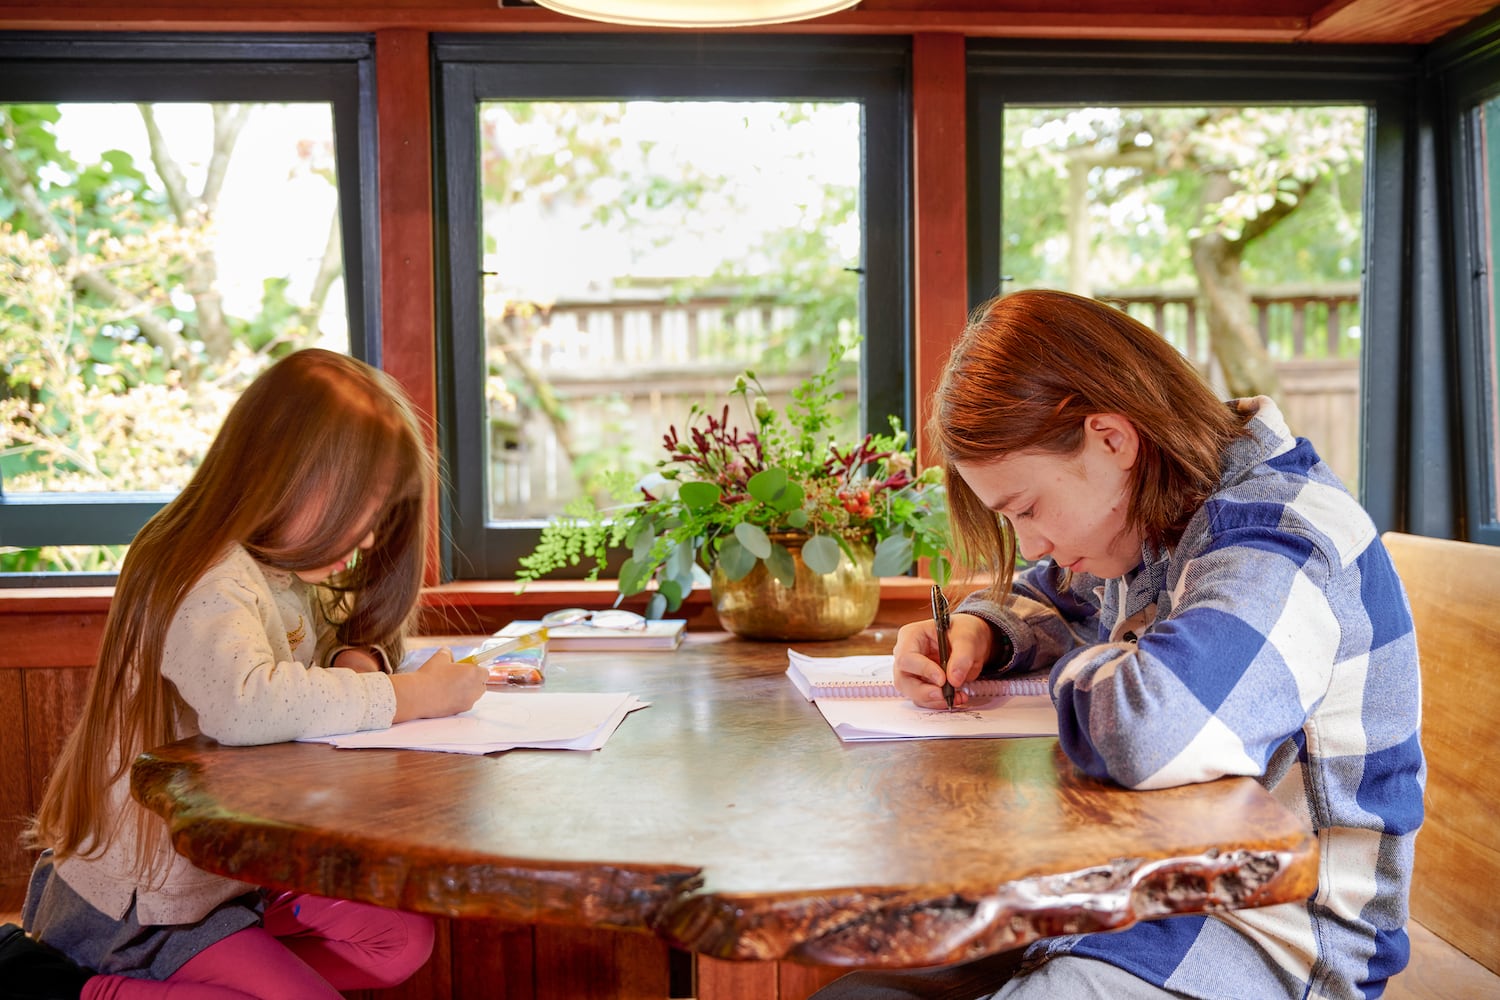 Children sit and draw at a creative live edge kitchen nook countertop table